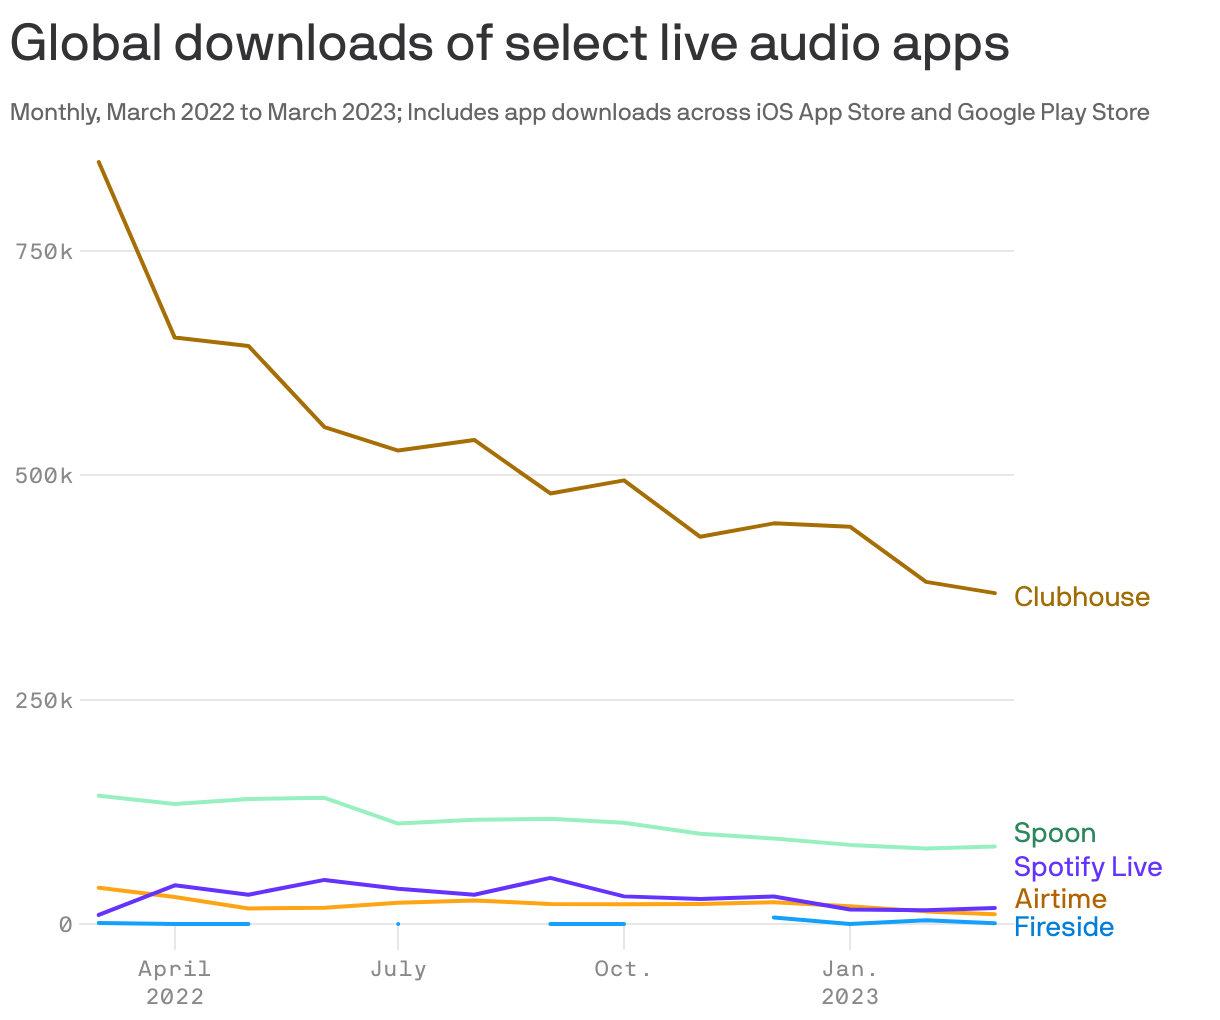 Global downloads of select live audio apps